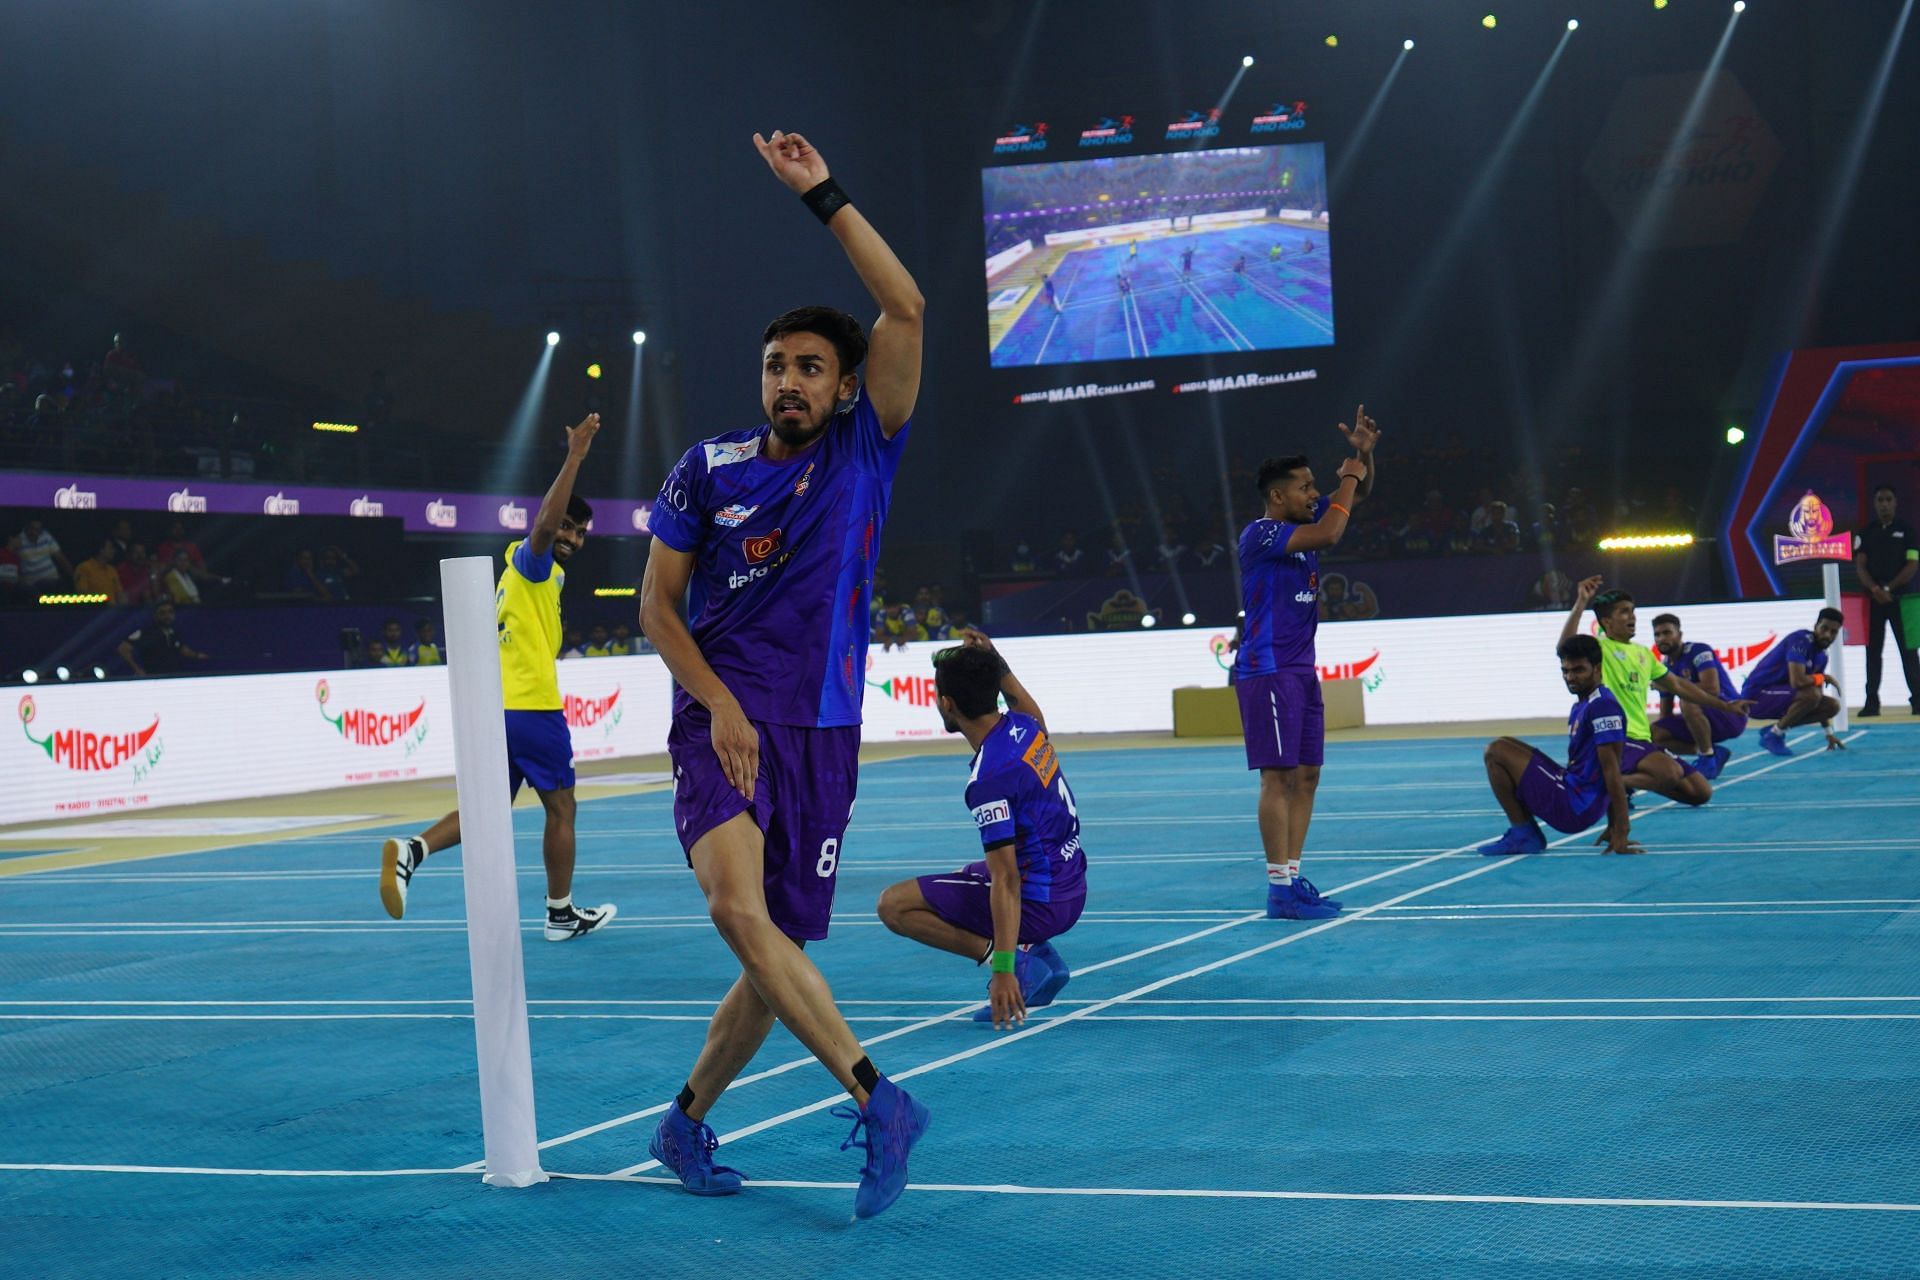 Can the Gujarat Giants continue their winning momentum in Ultimate Kho Kho 2022? (Image: Gujarat Giants/Twitter)